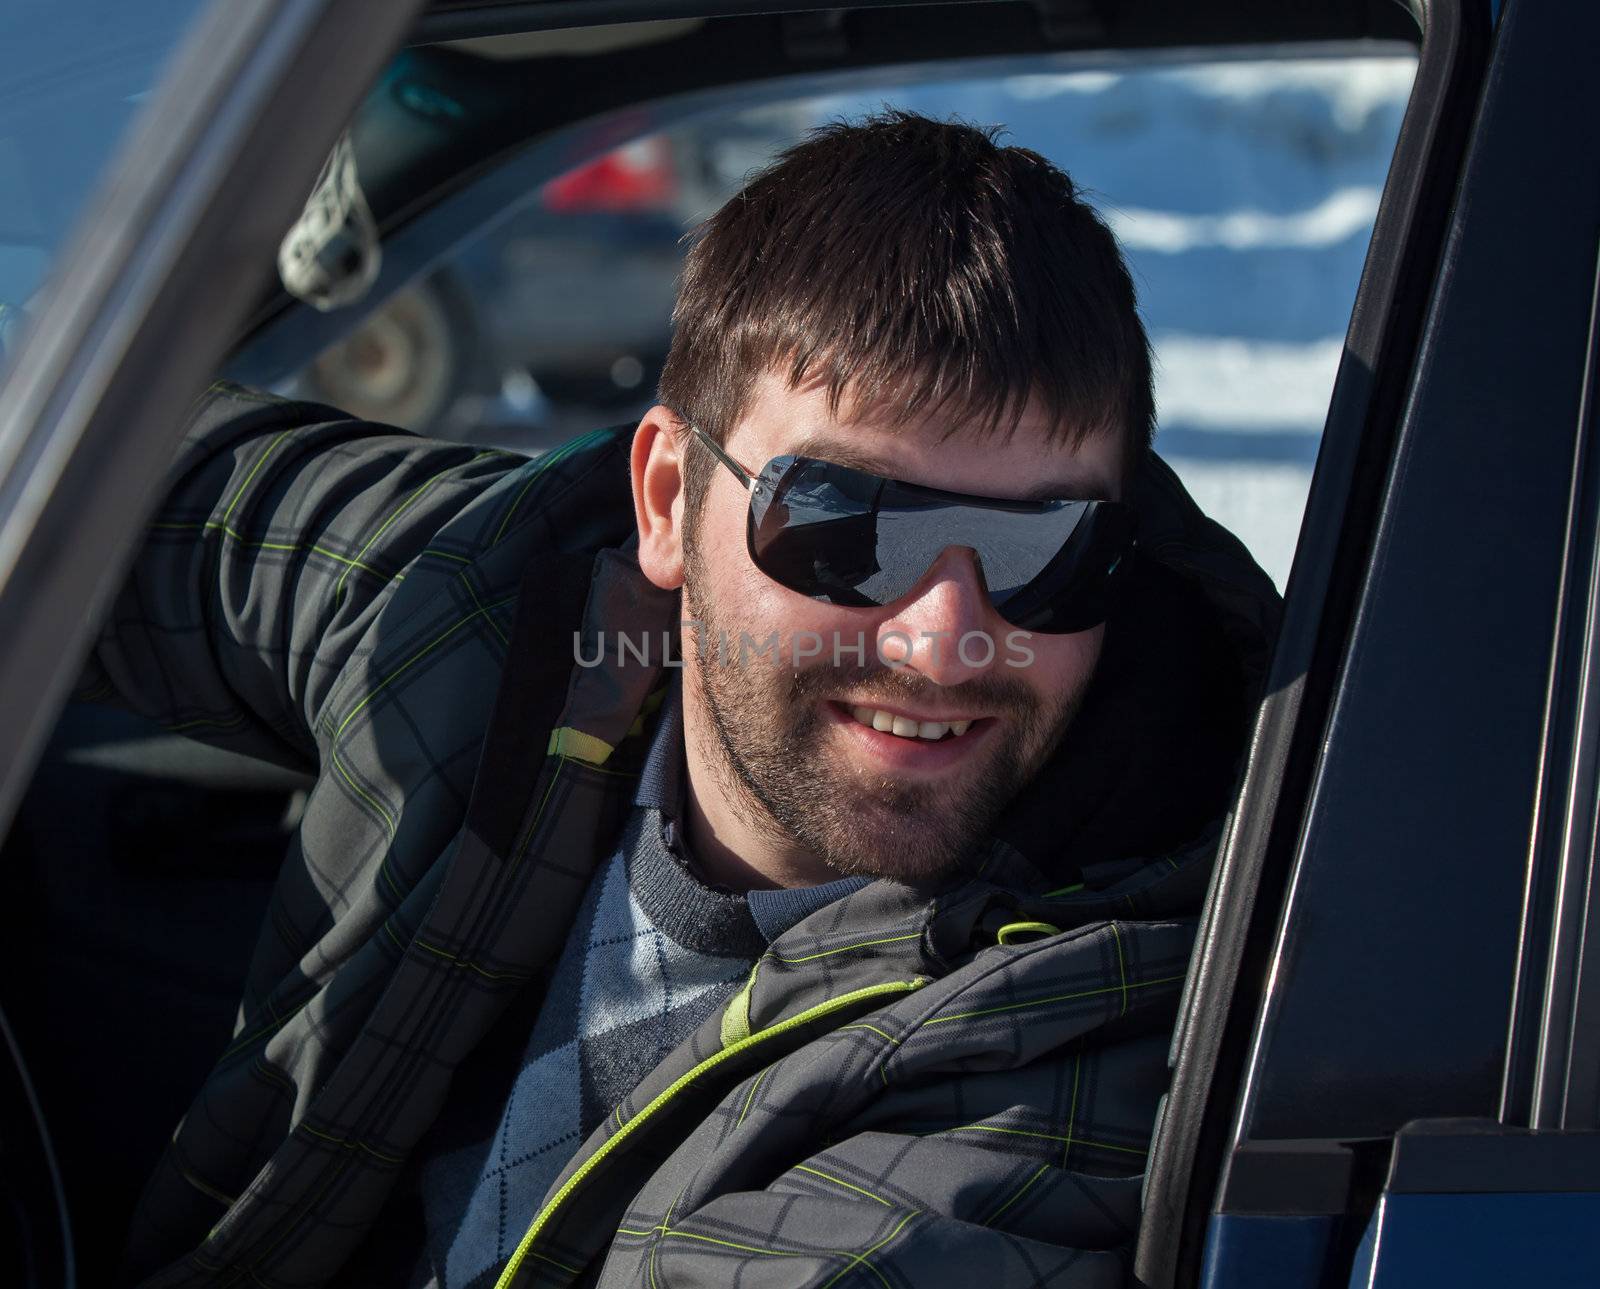 A young man wearing sunglasses in a private car by AleksandrN